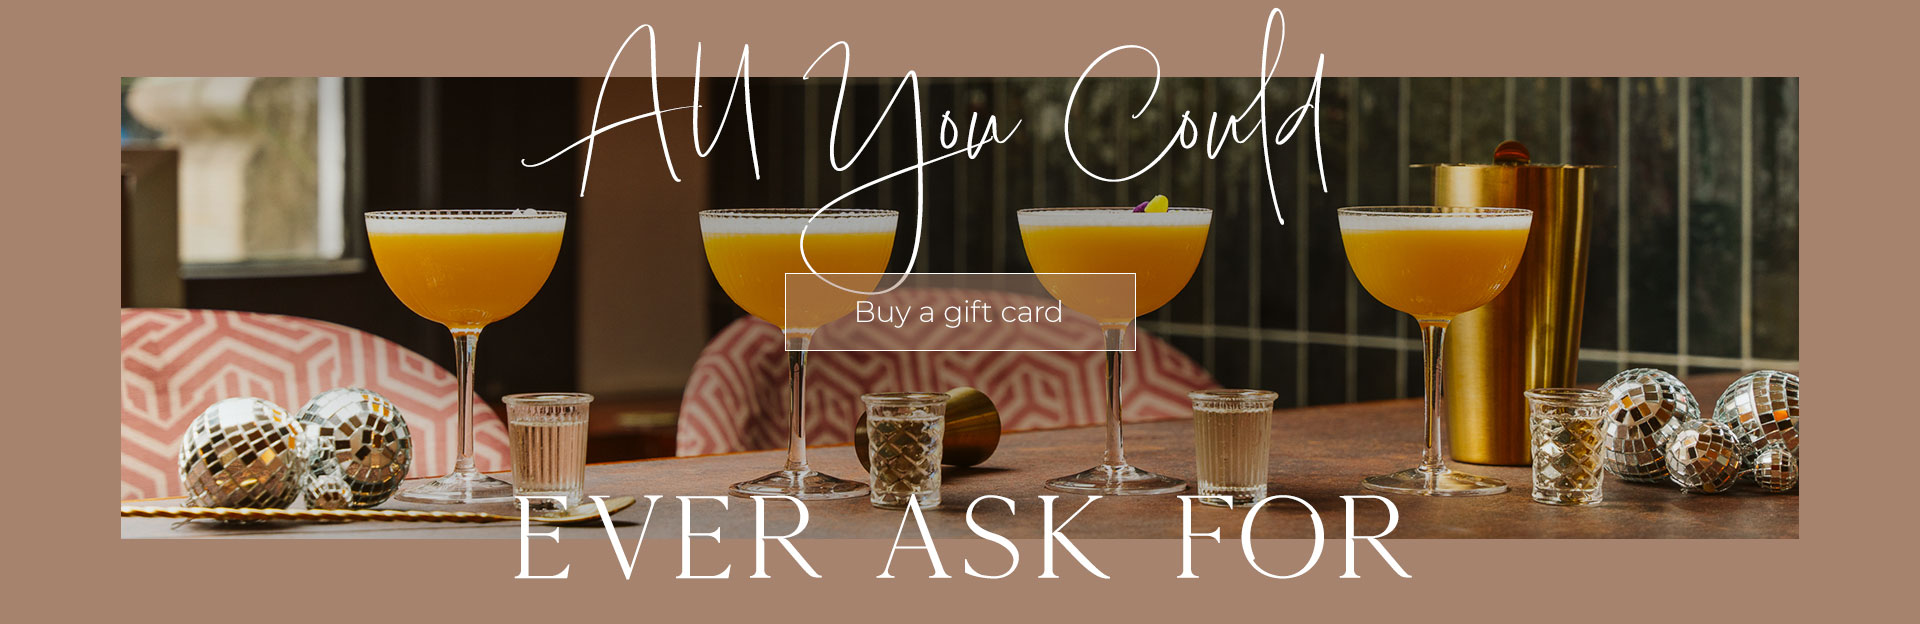 All Bar One Gift Cards at All Bar One Guildford